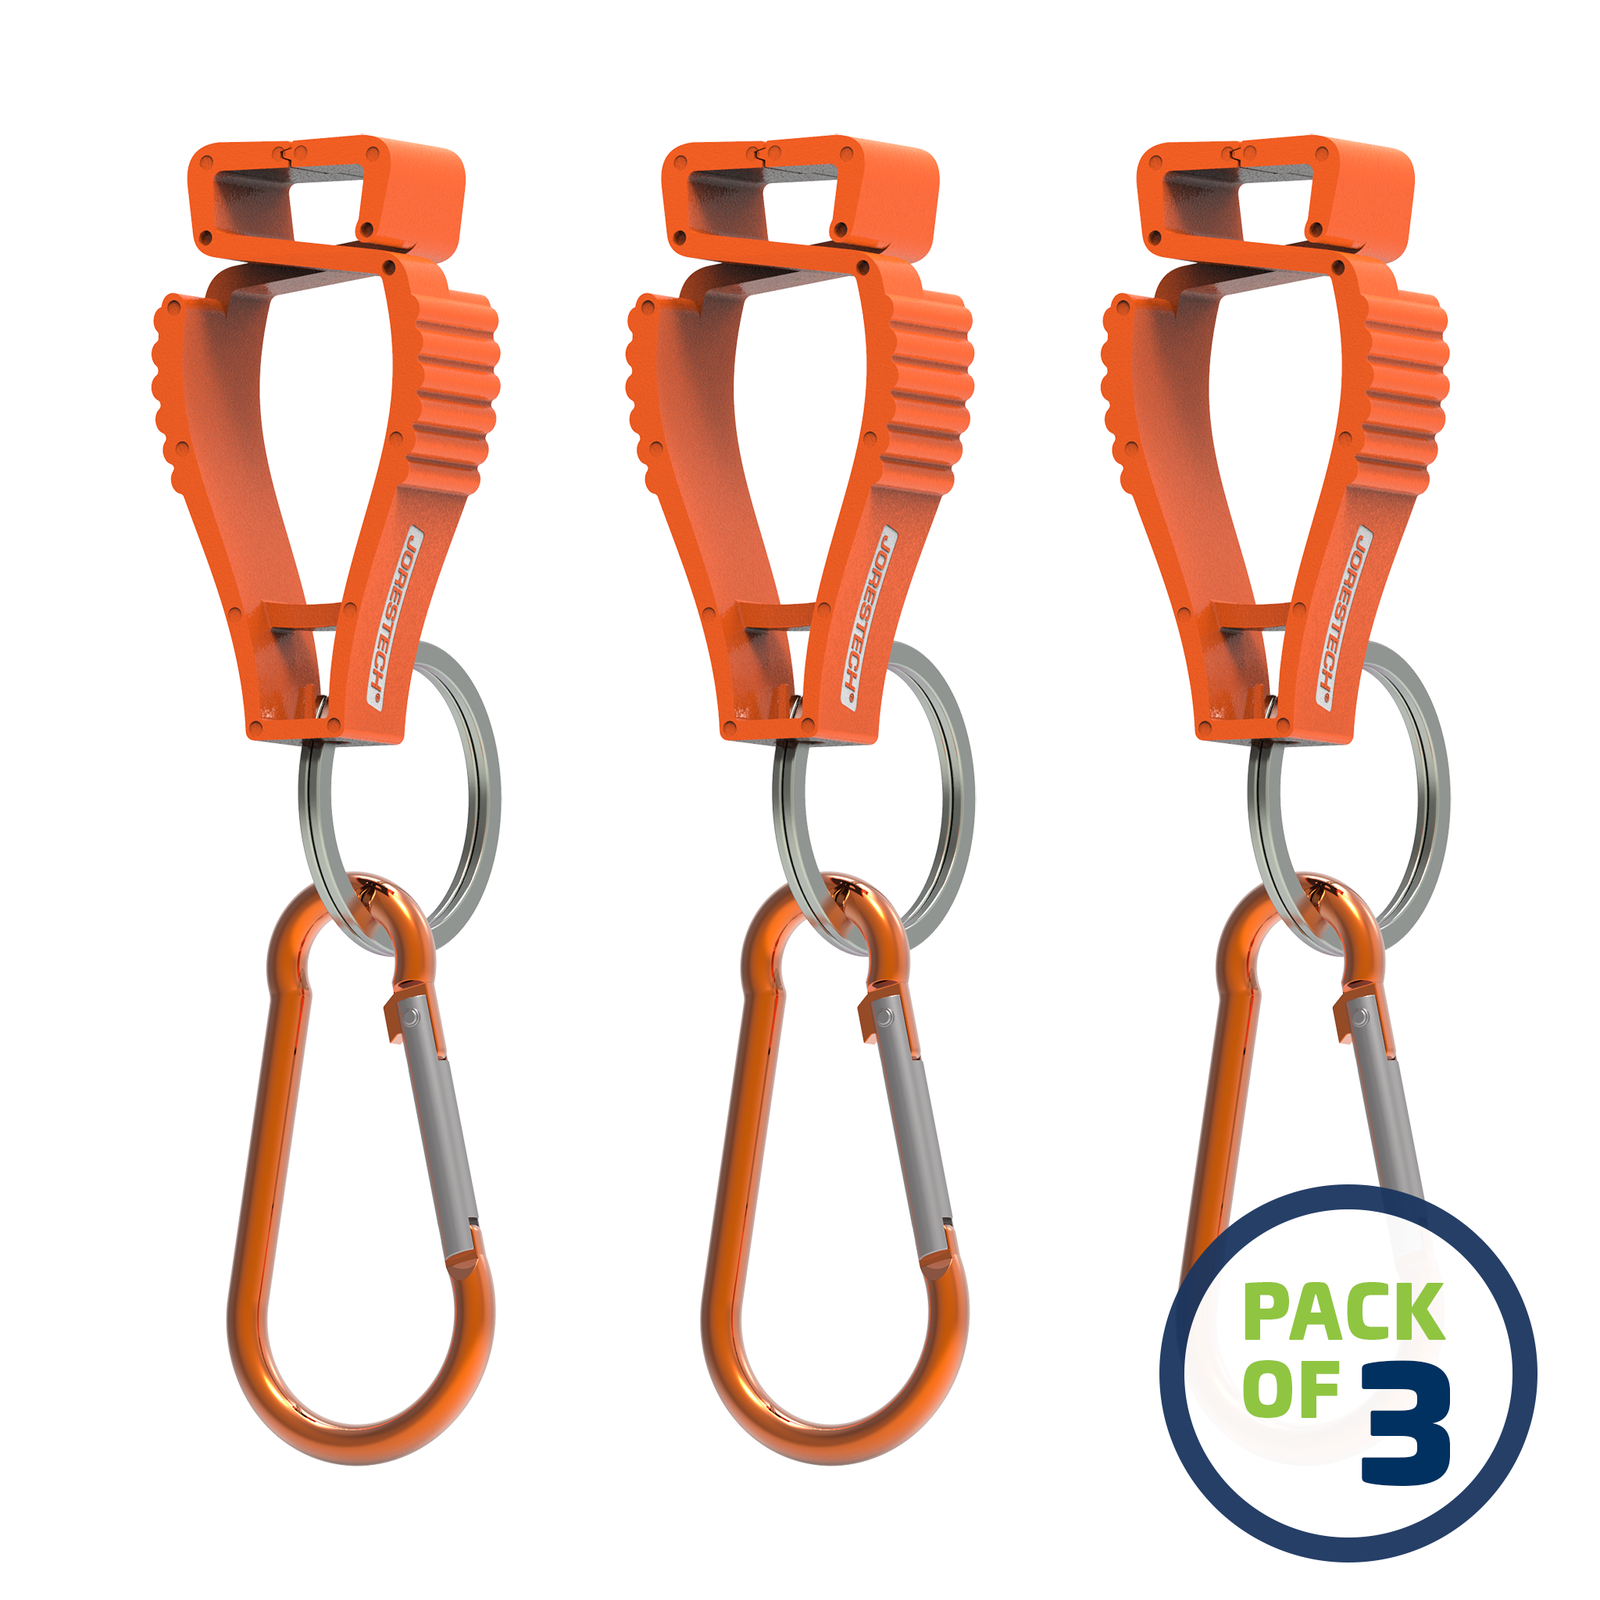 Pack of 3 Orange JORESTECH glove clip safety holders with carabiner 